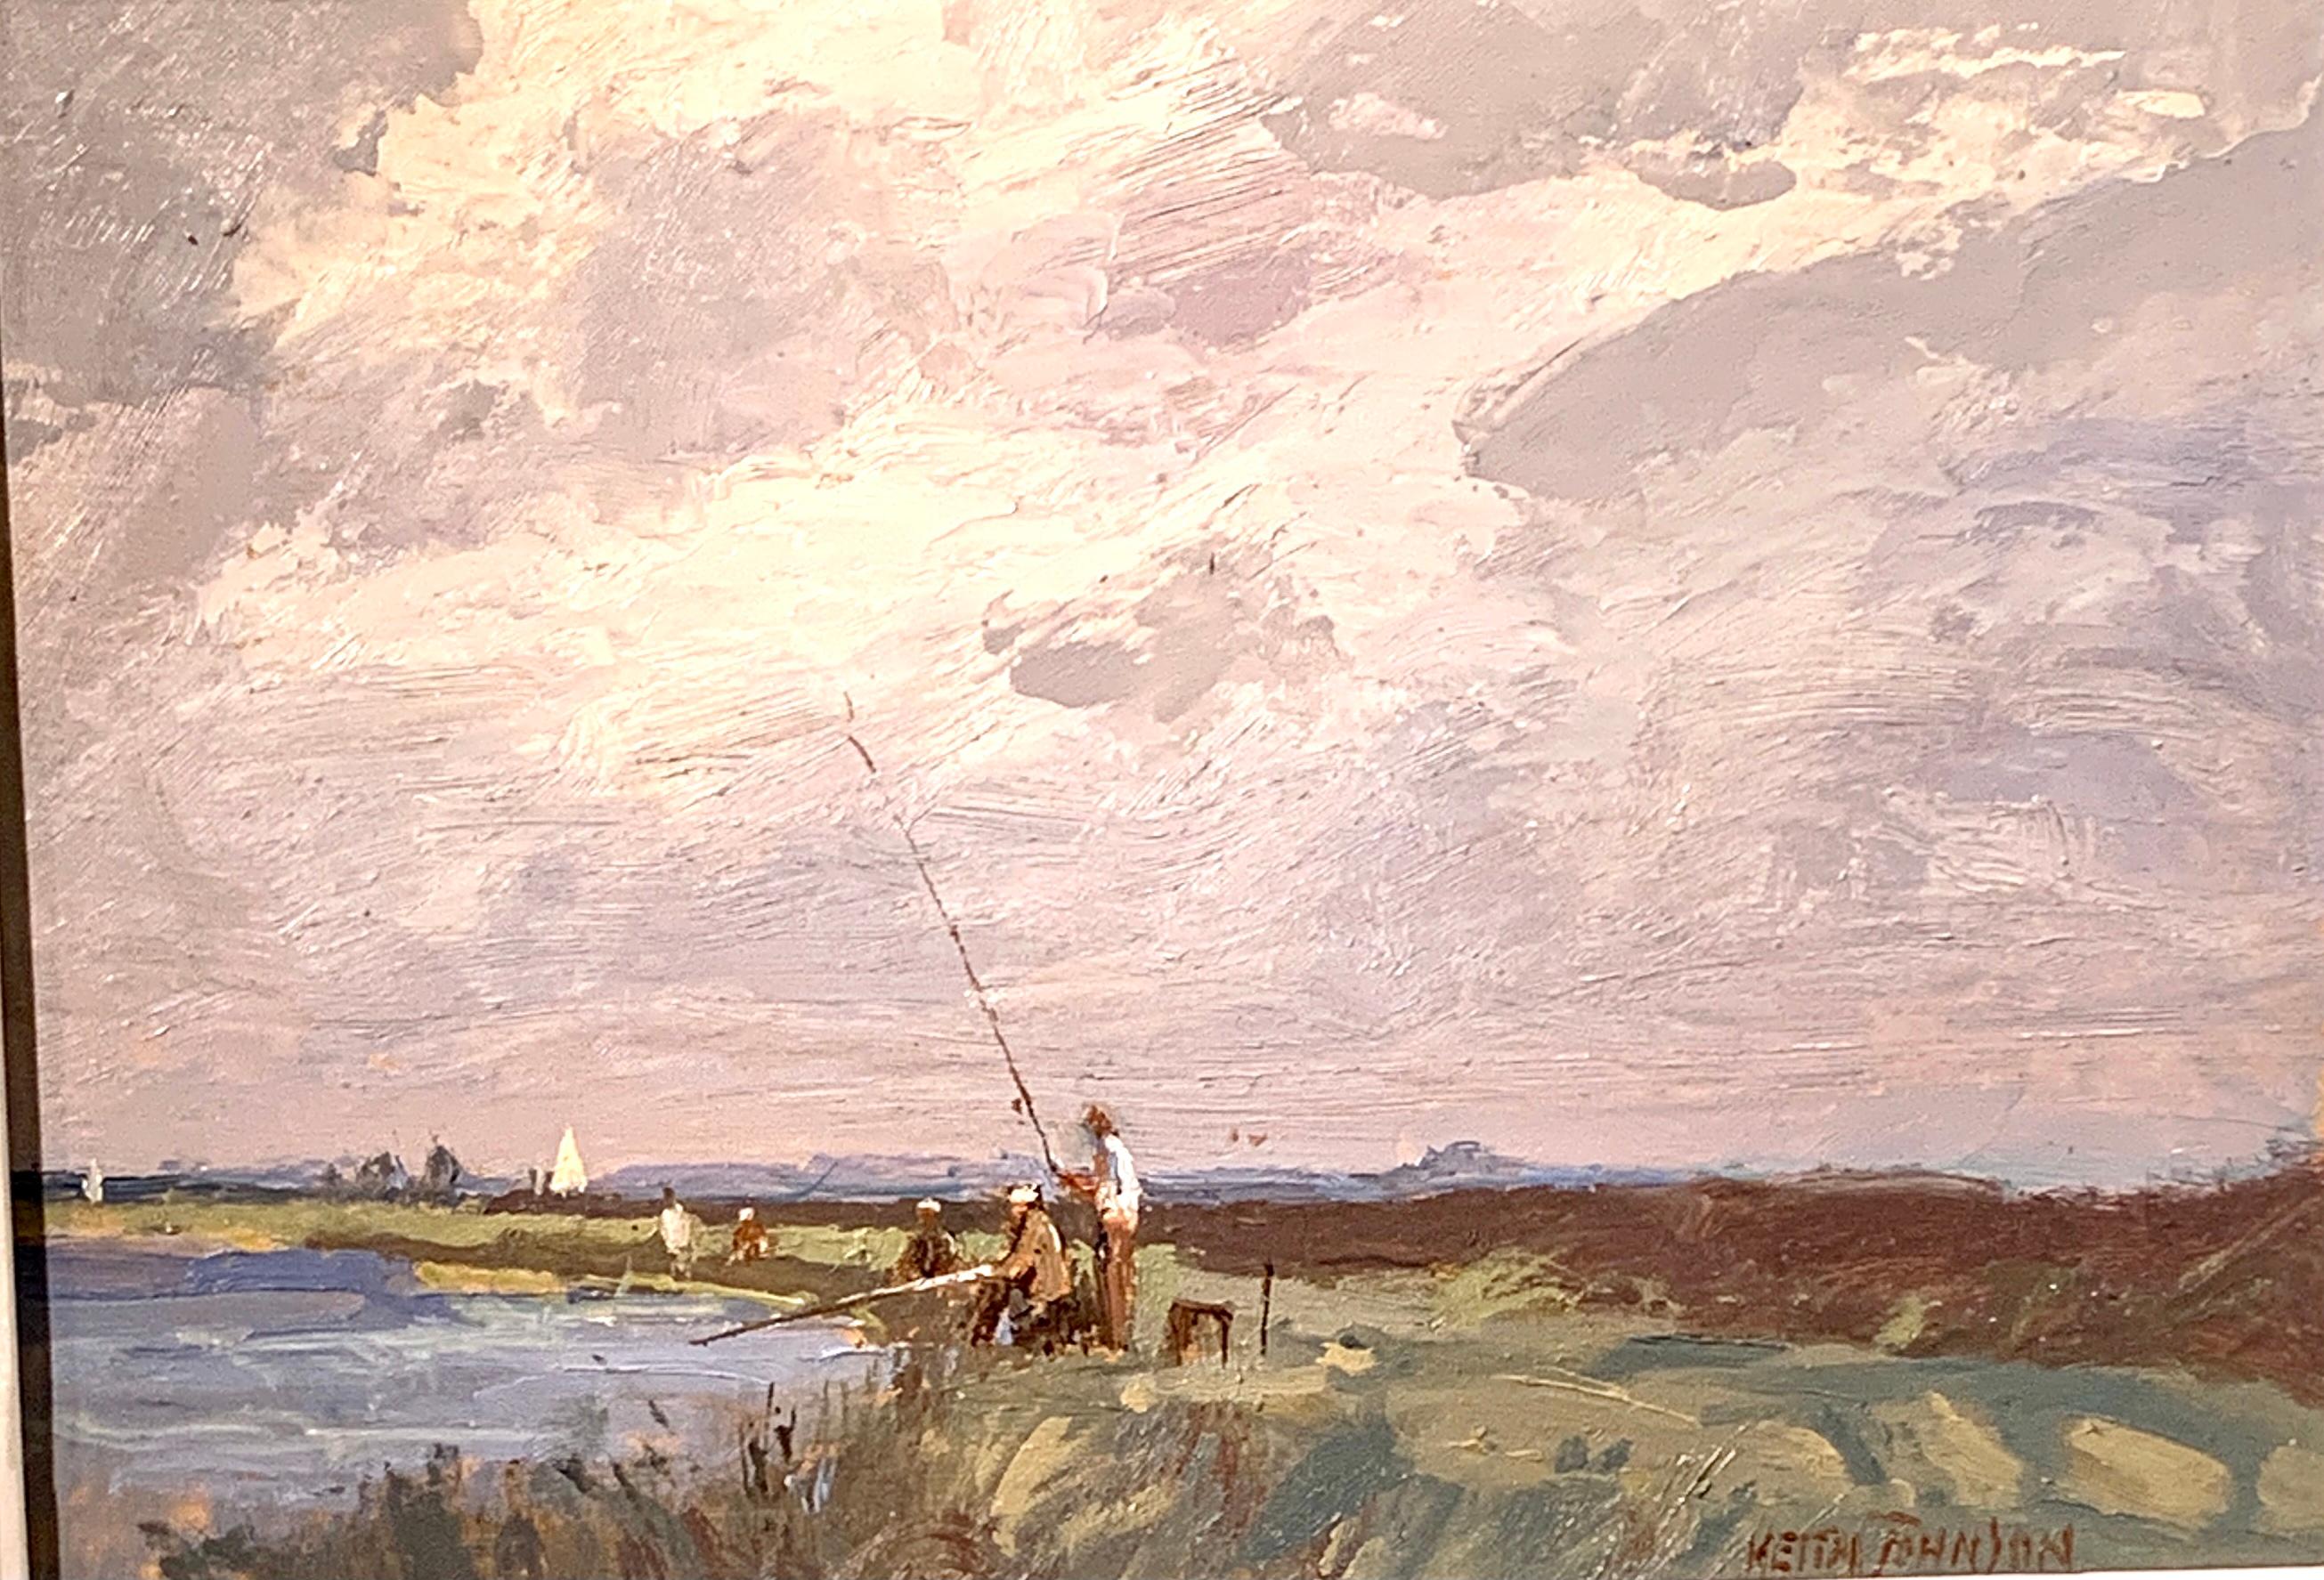 English Impressionist 20th century fisherman fishing in Norfolk , England. - Painting by Keith Johnson